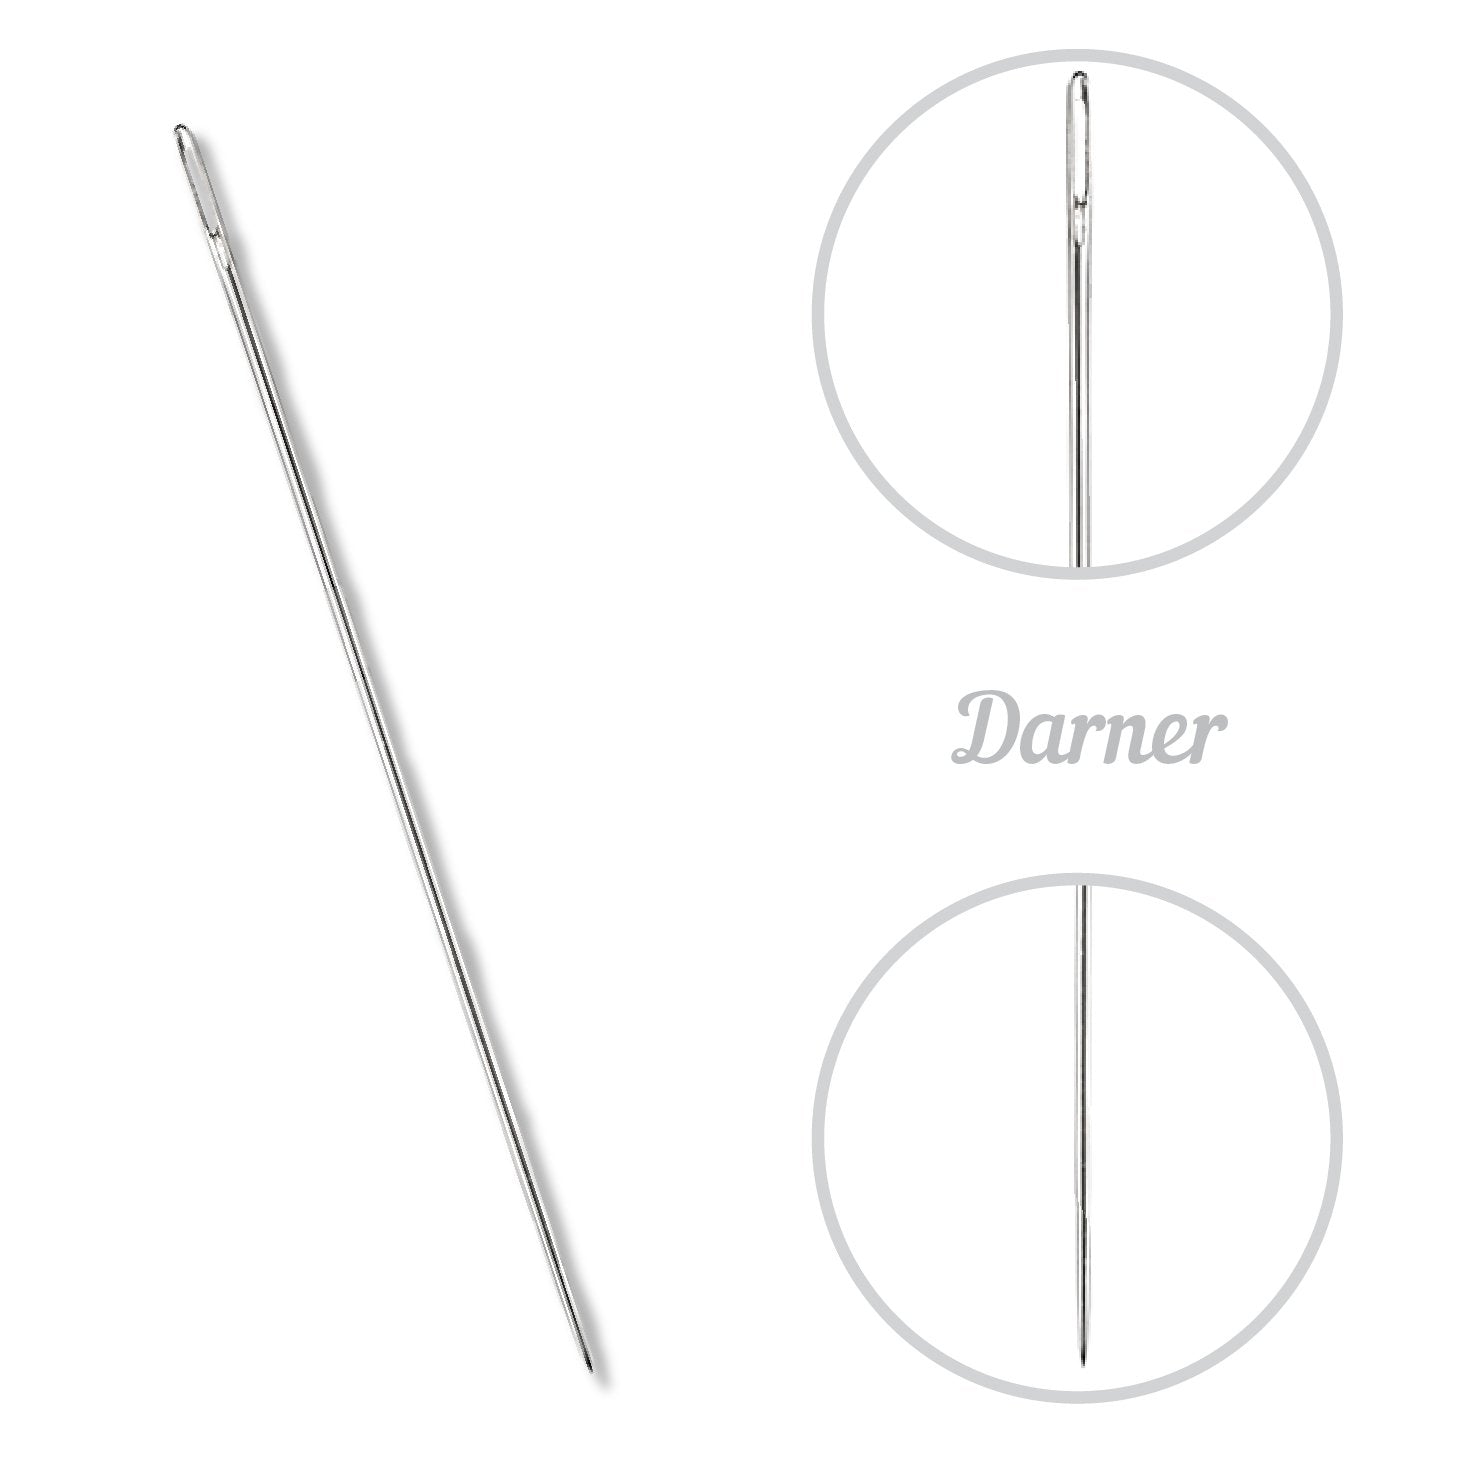 CN - Colonial Needle -Darners - Assortment - #03 - #09-3